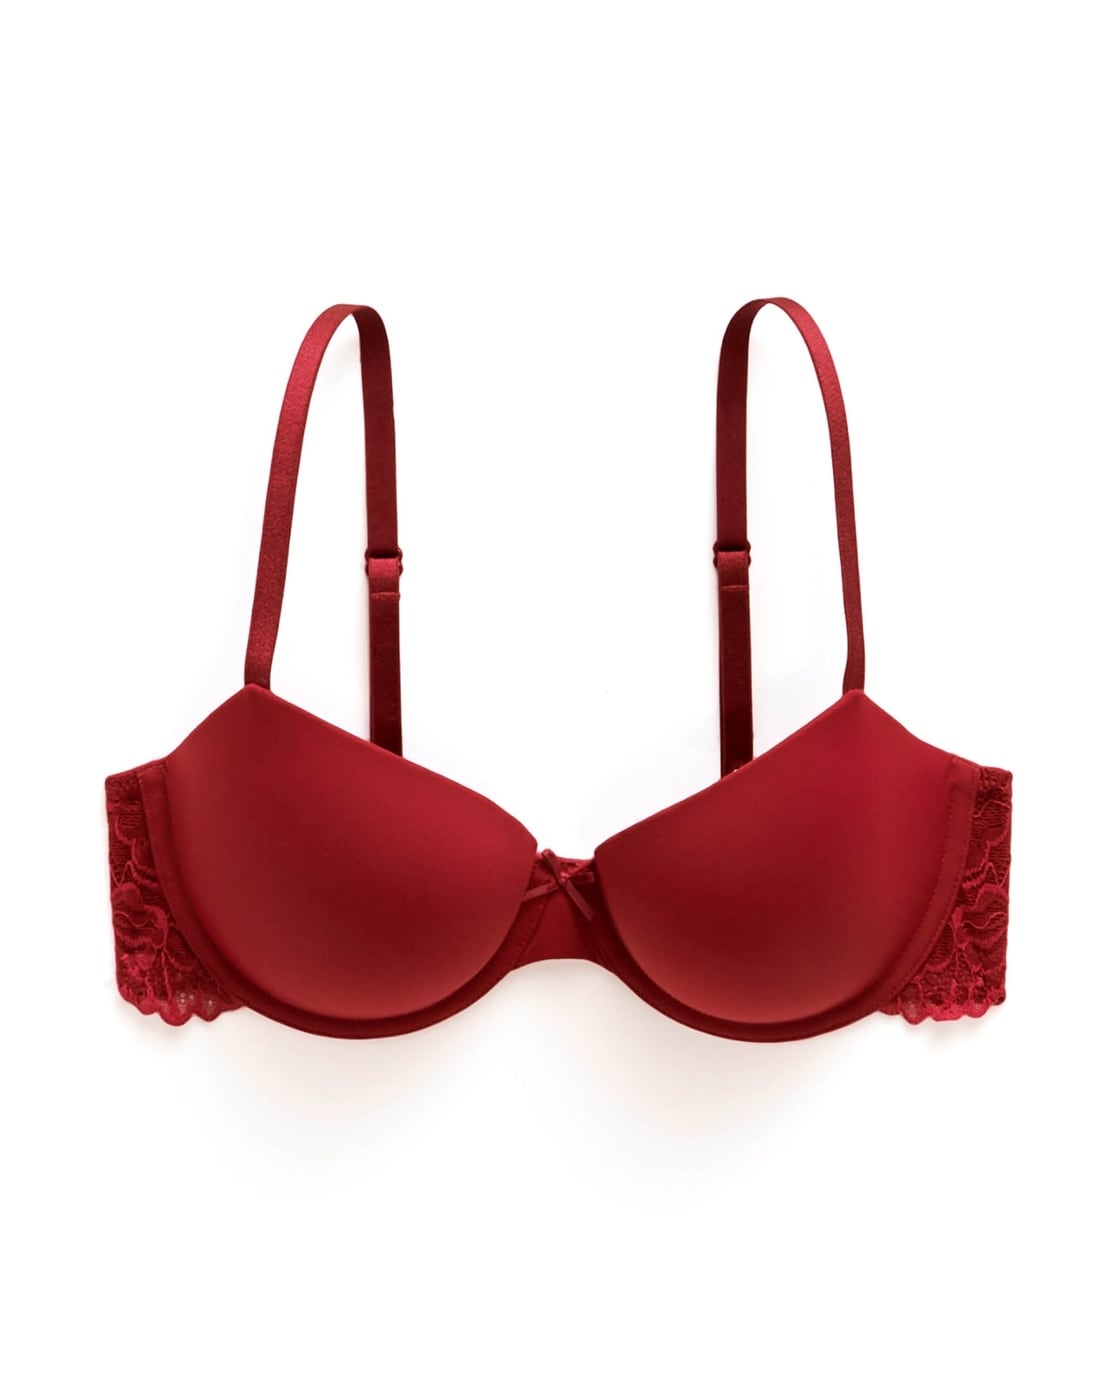 Buy online Bright Rose Red Bra from lingerie for Women by Biara for ₹299 at  0% off